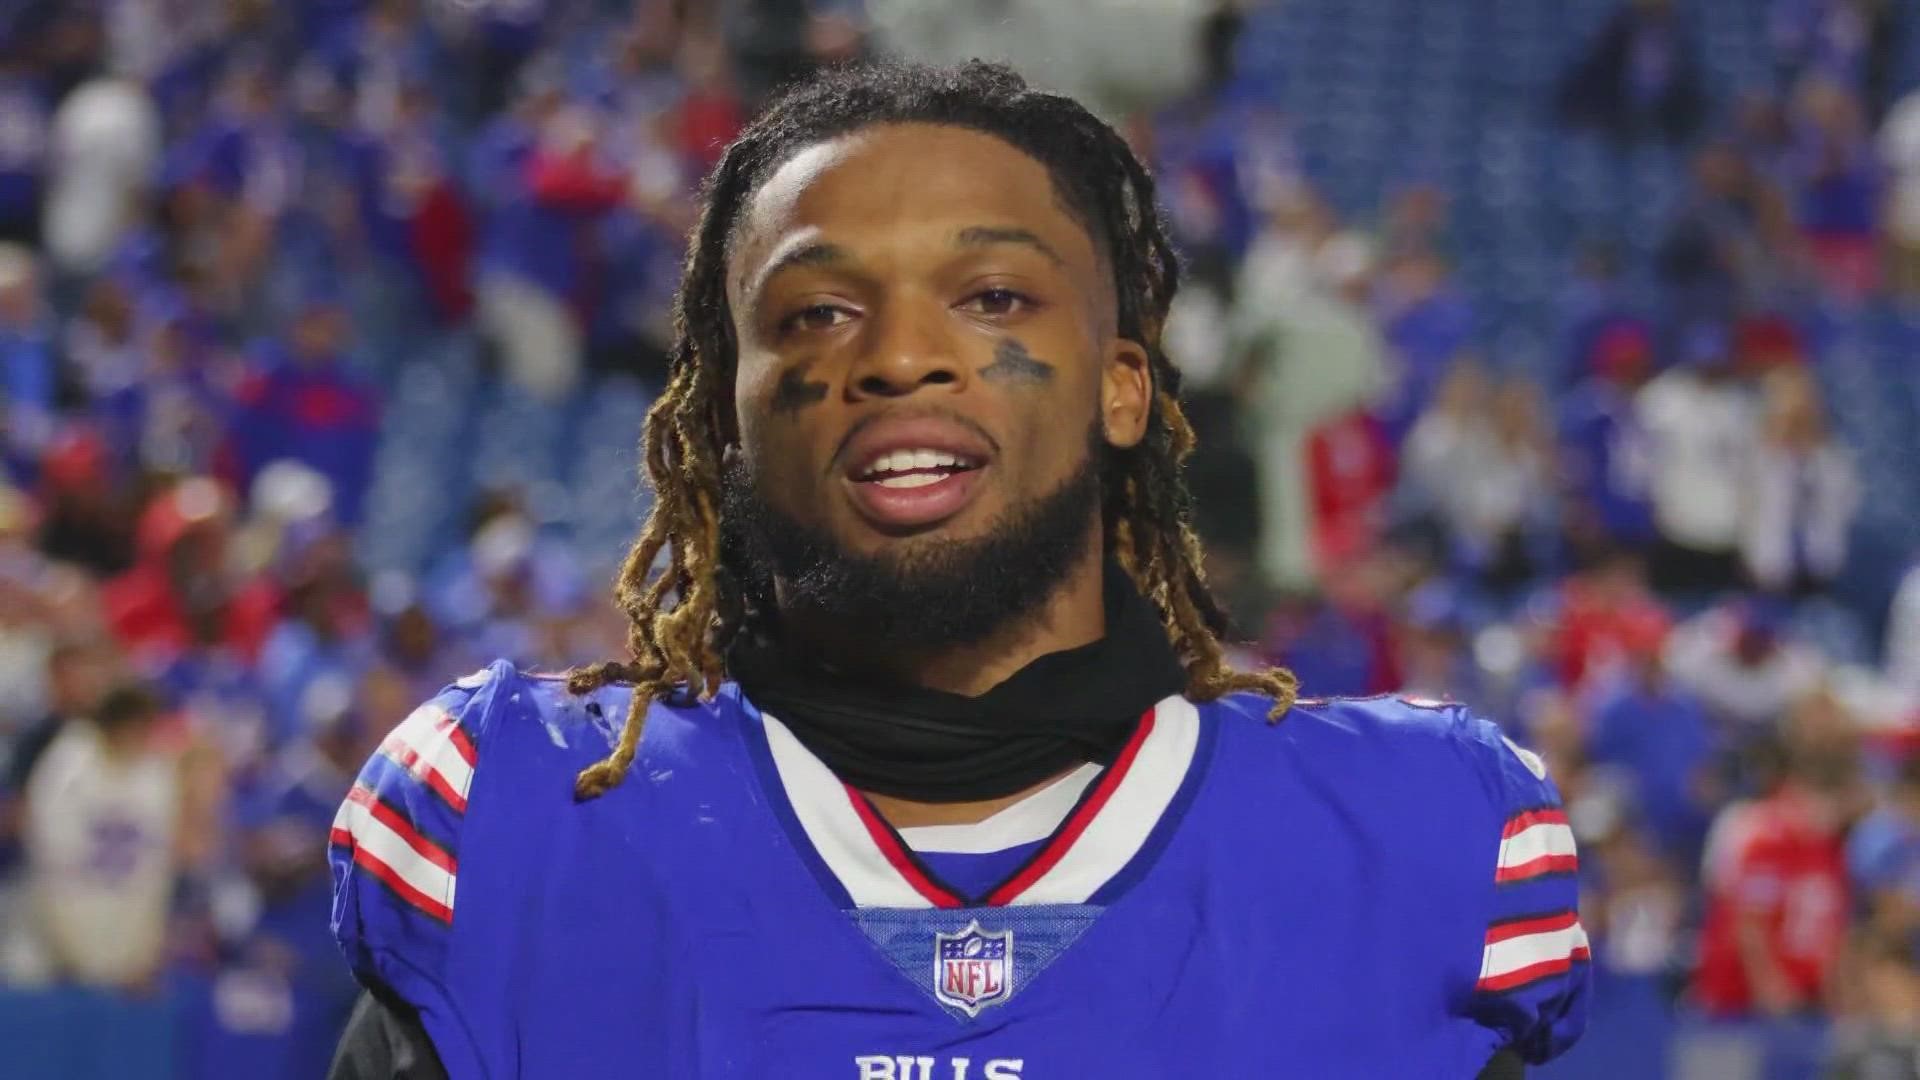 Buffalo Bills safety Damar Hamlin has shown what physicians treating him are calling “remarkable improvement over the past 24 hours,” the team announced Thursday.